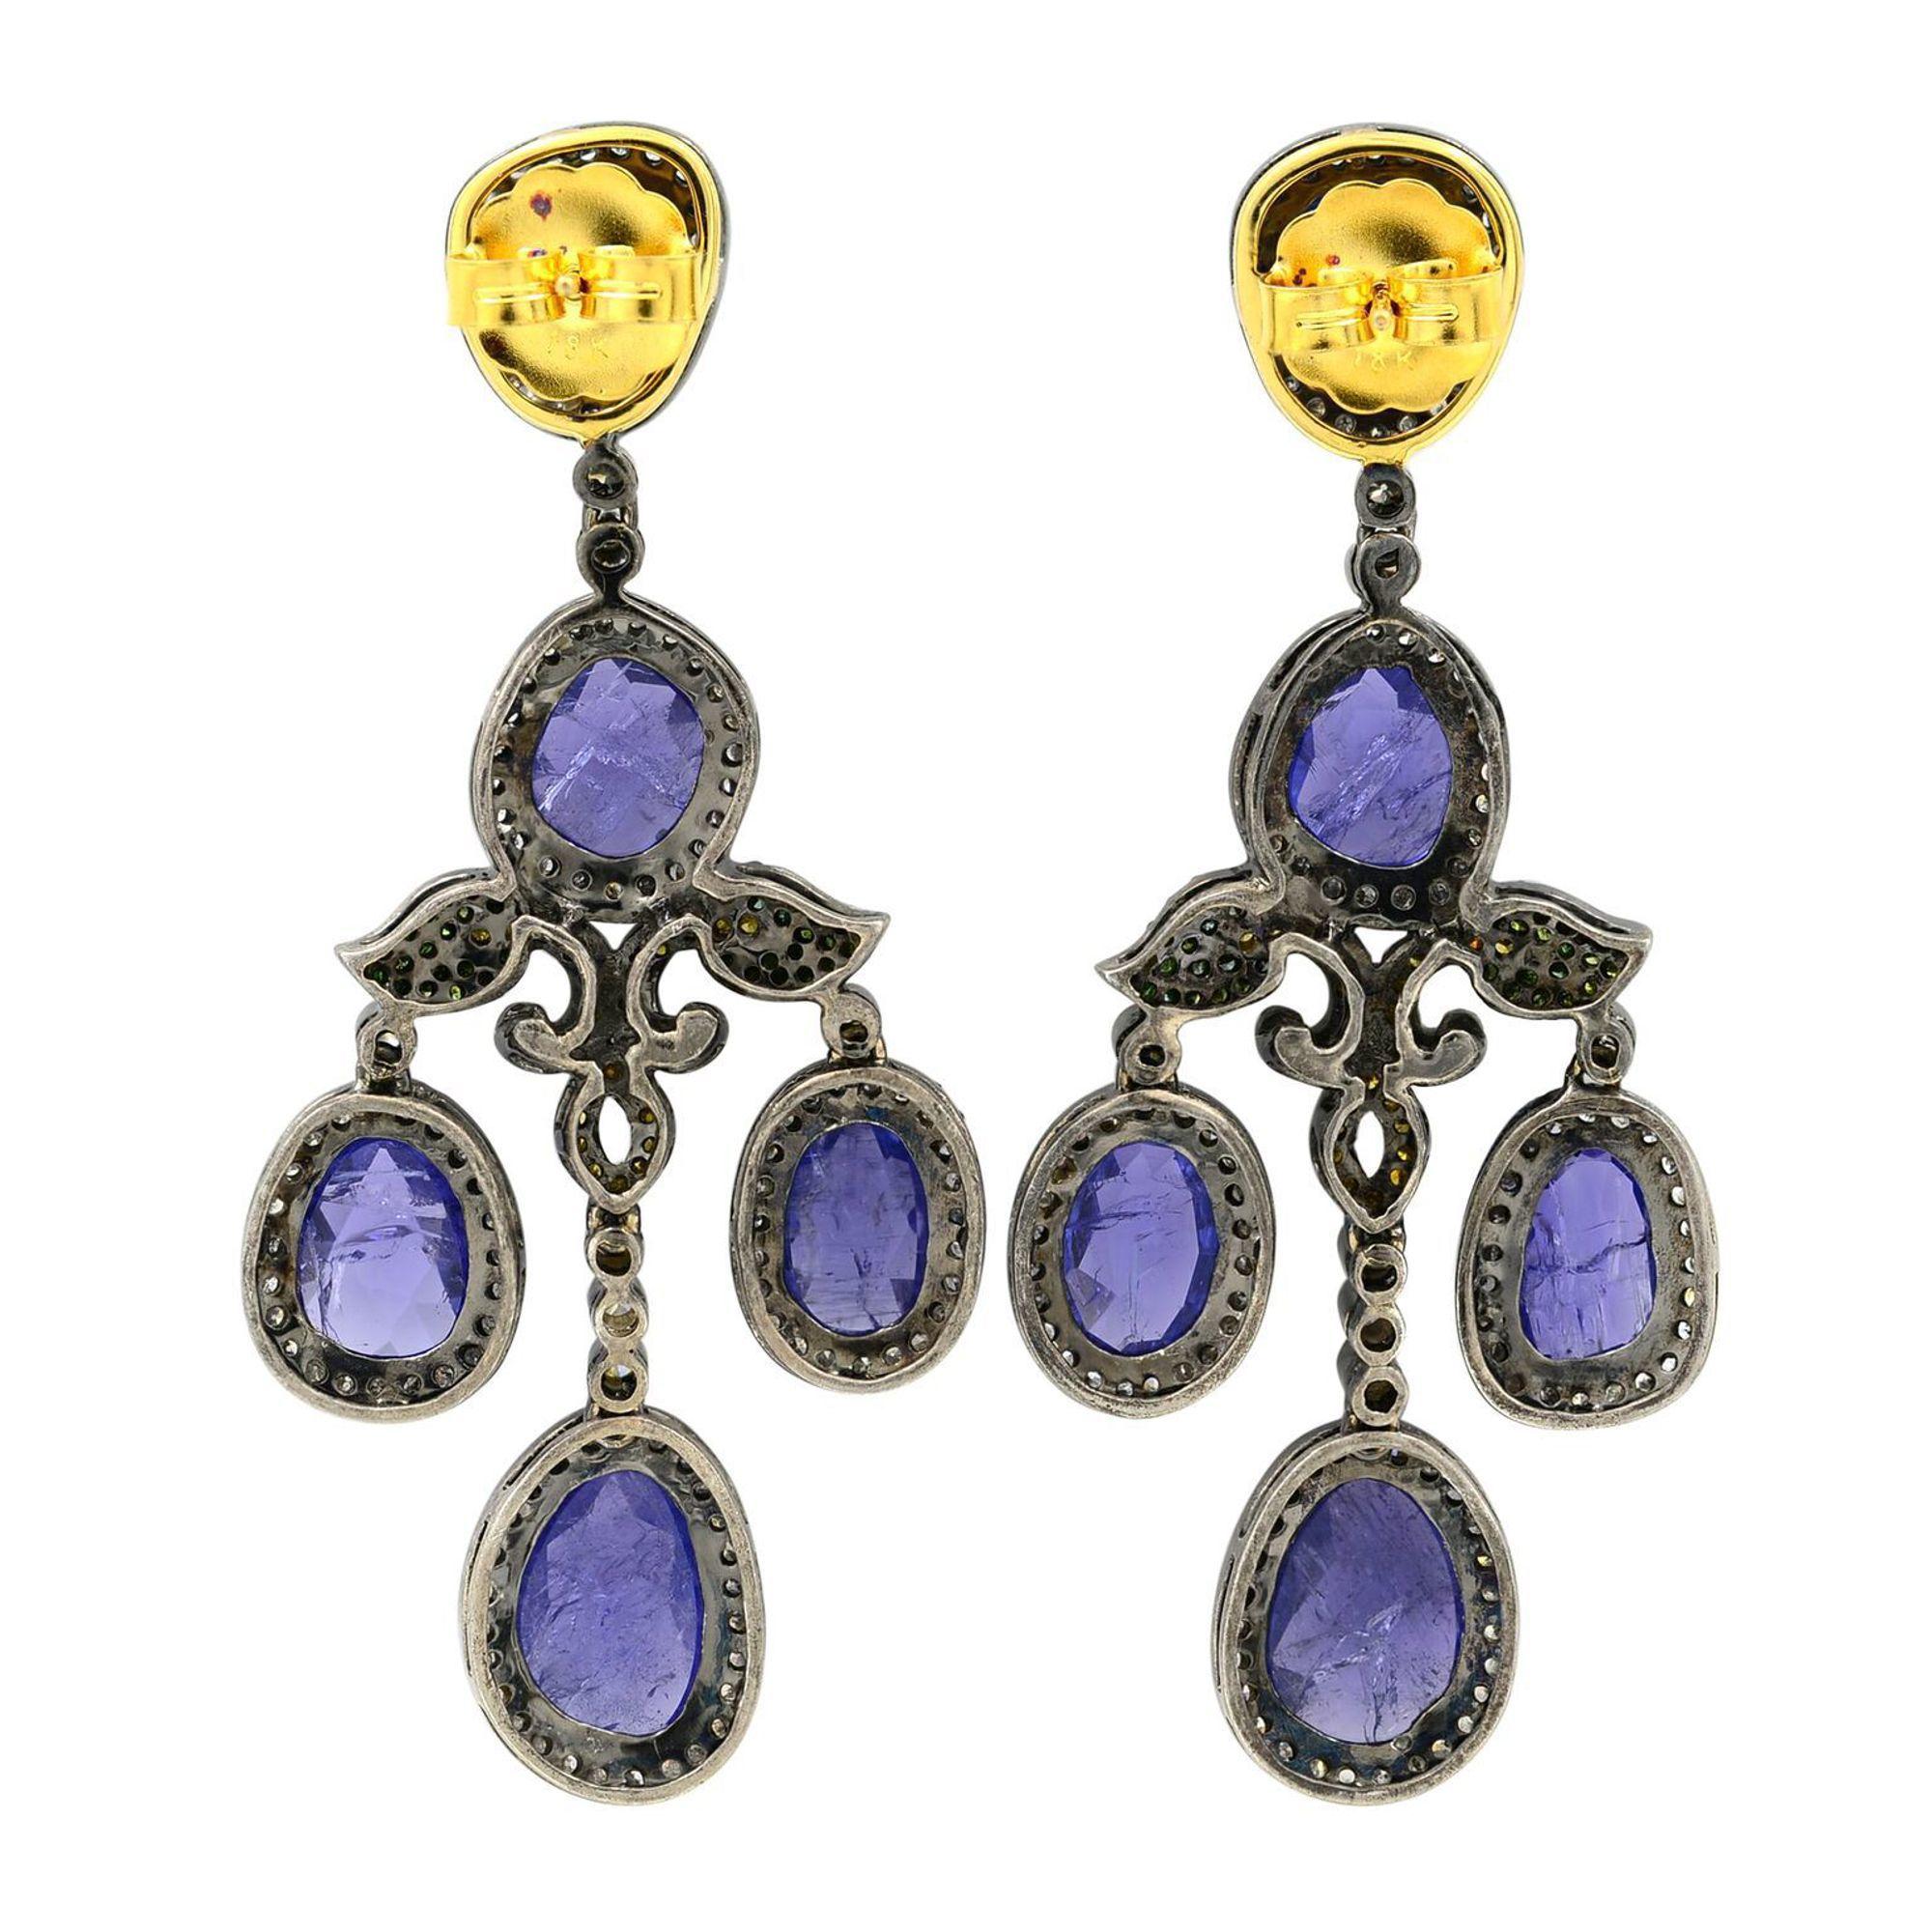 Measuring an impressive 2.5 inches long, these fabulous chandelier earrings swing and sparkle with a geometric array of bright diamonds and bright Tanzanites. Radiant rarities, lightly hand-fabricated in 18k white gold. Encrusted with 3.23 carats of